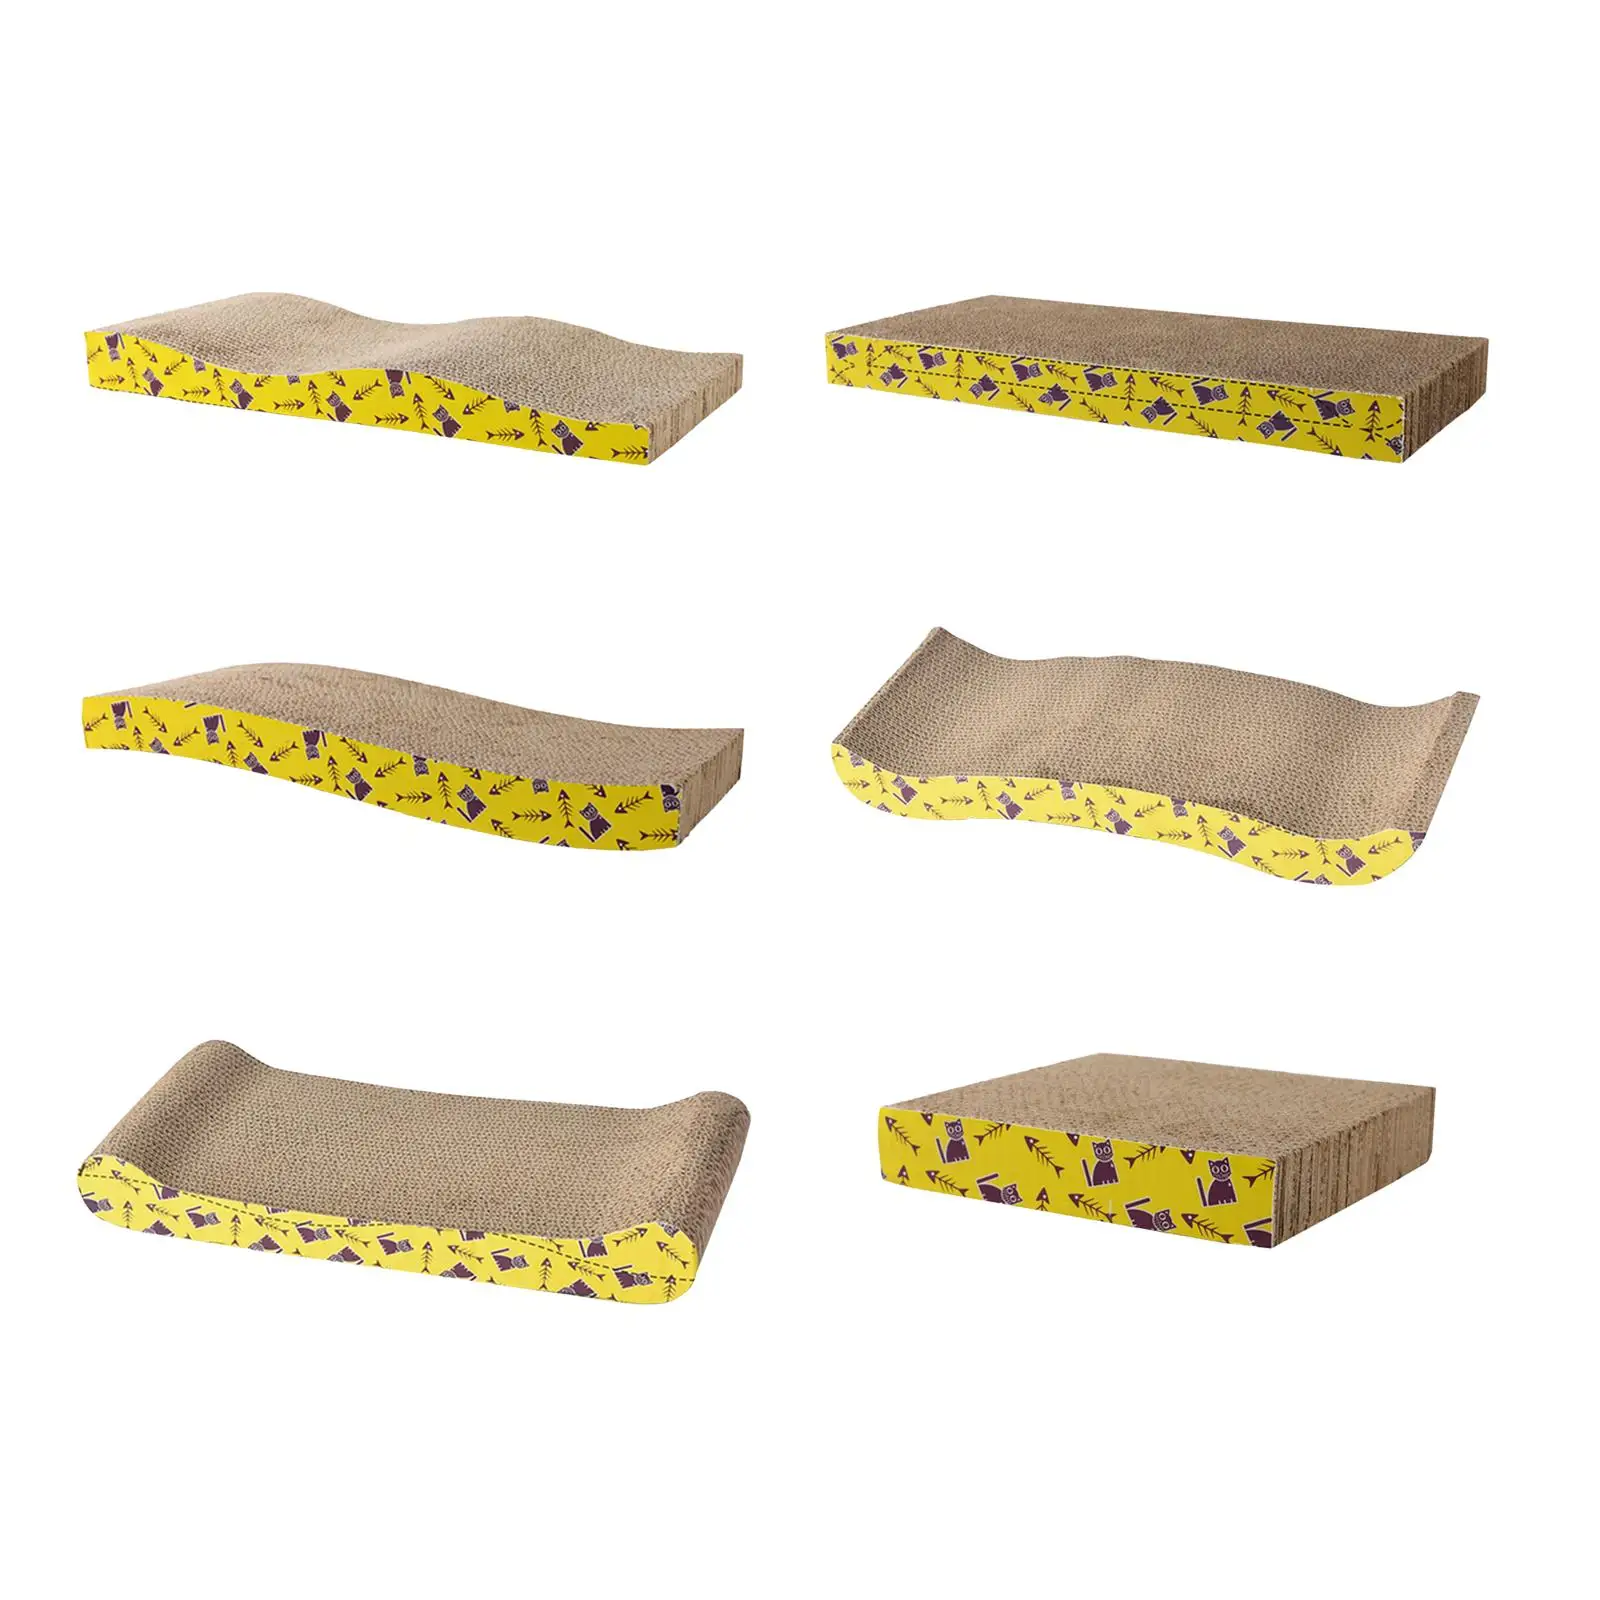 Scratching Lounge Bed Cat Scratchers Cardboard Cat Scratch Pad Nest Cat Scratching Board for Sleeping Small Medium Large Cats